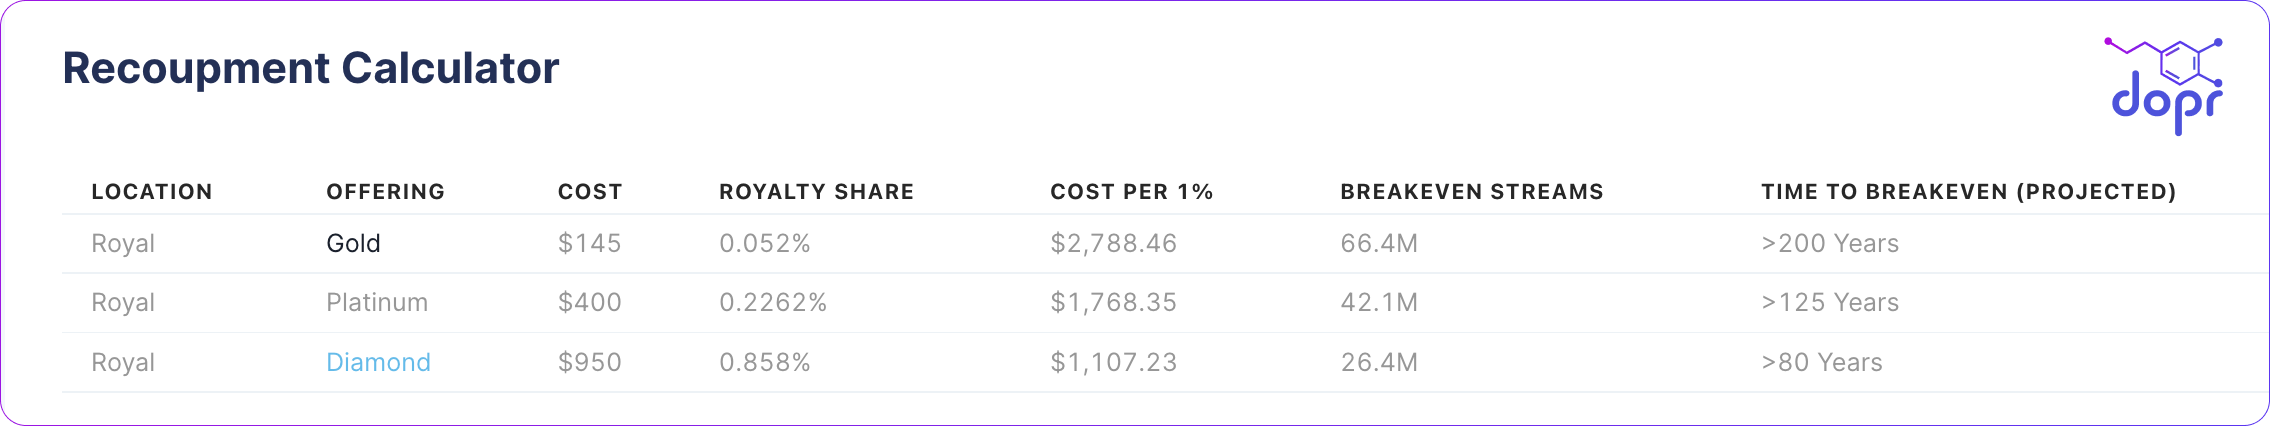 The recoupment calculator estimates the time and streams needed for token owners to breakeven, along with other details for each offering.